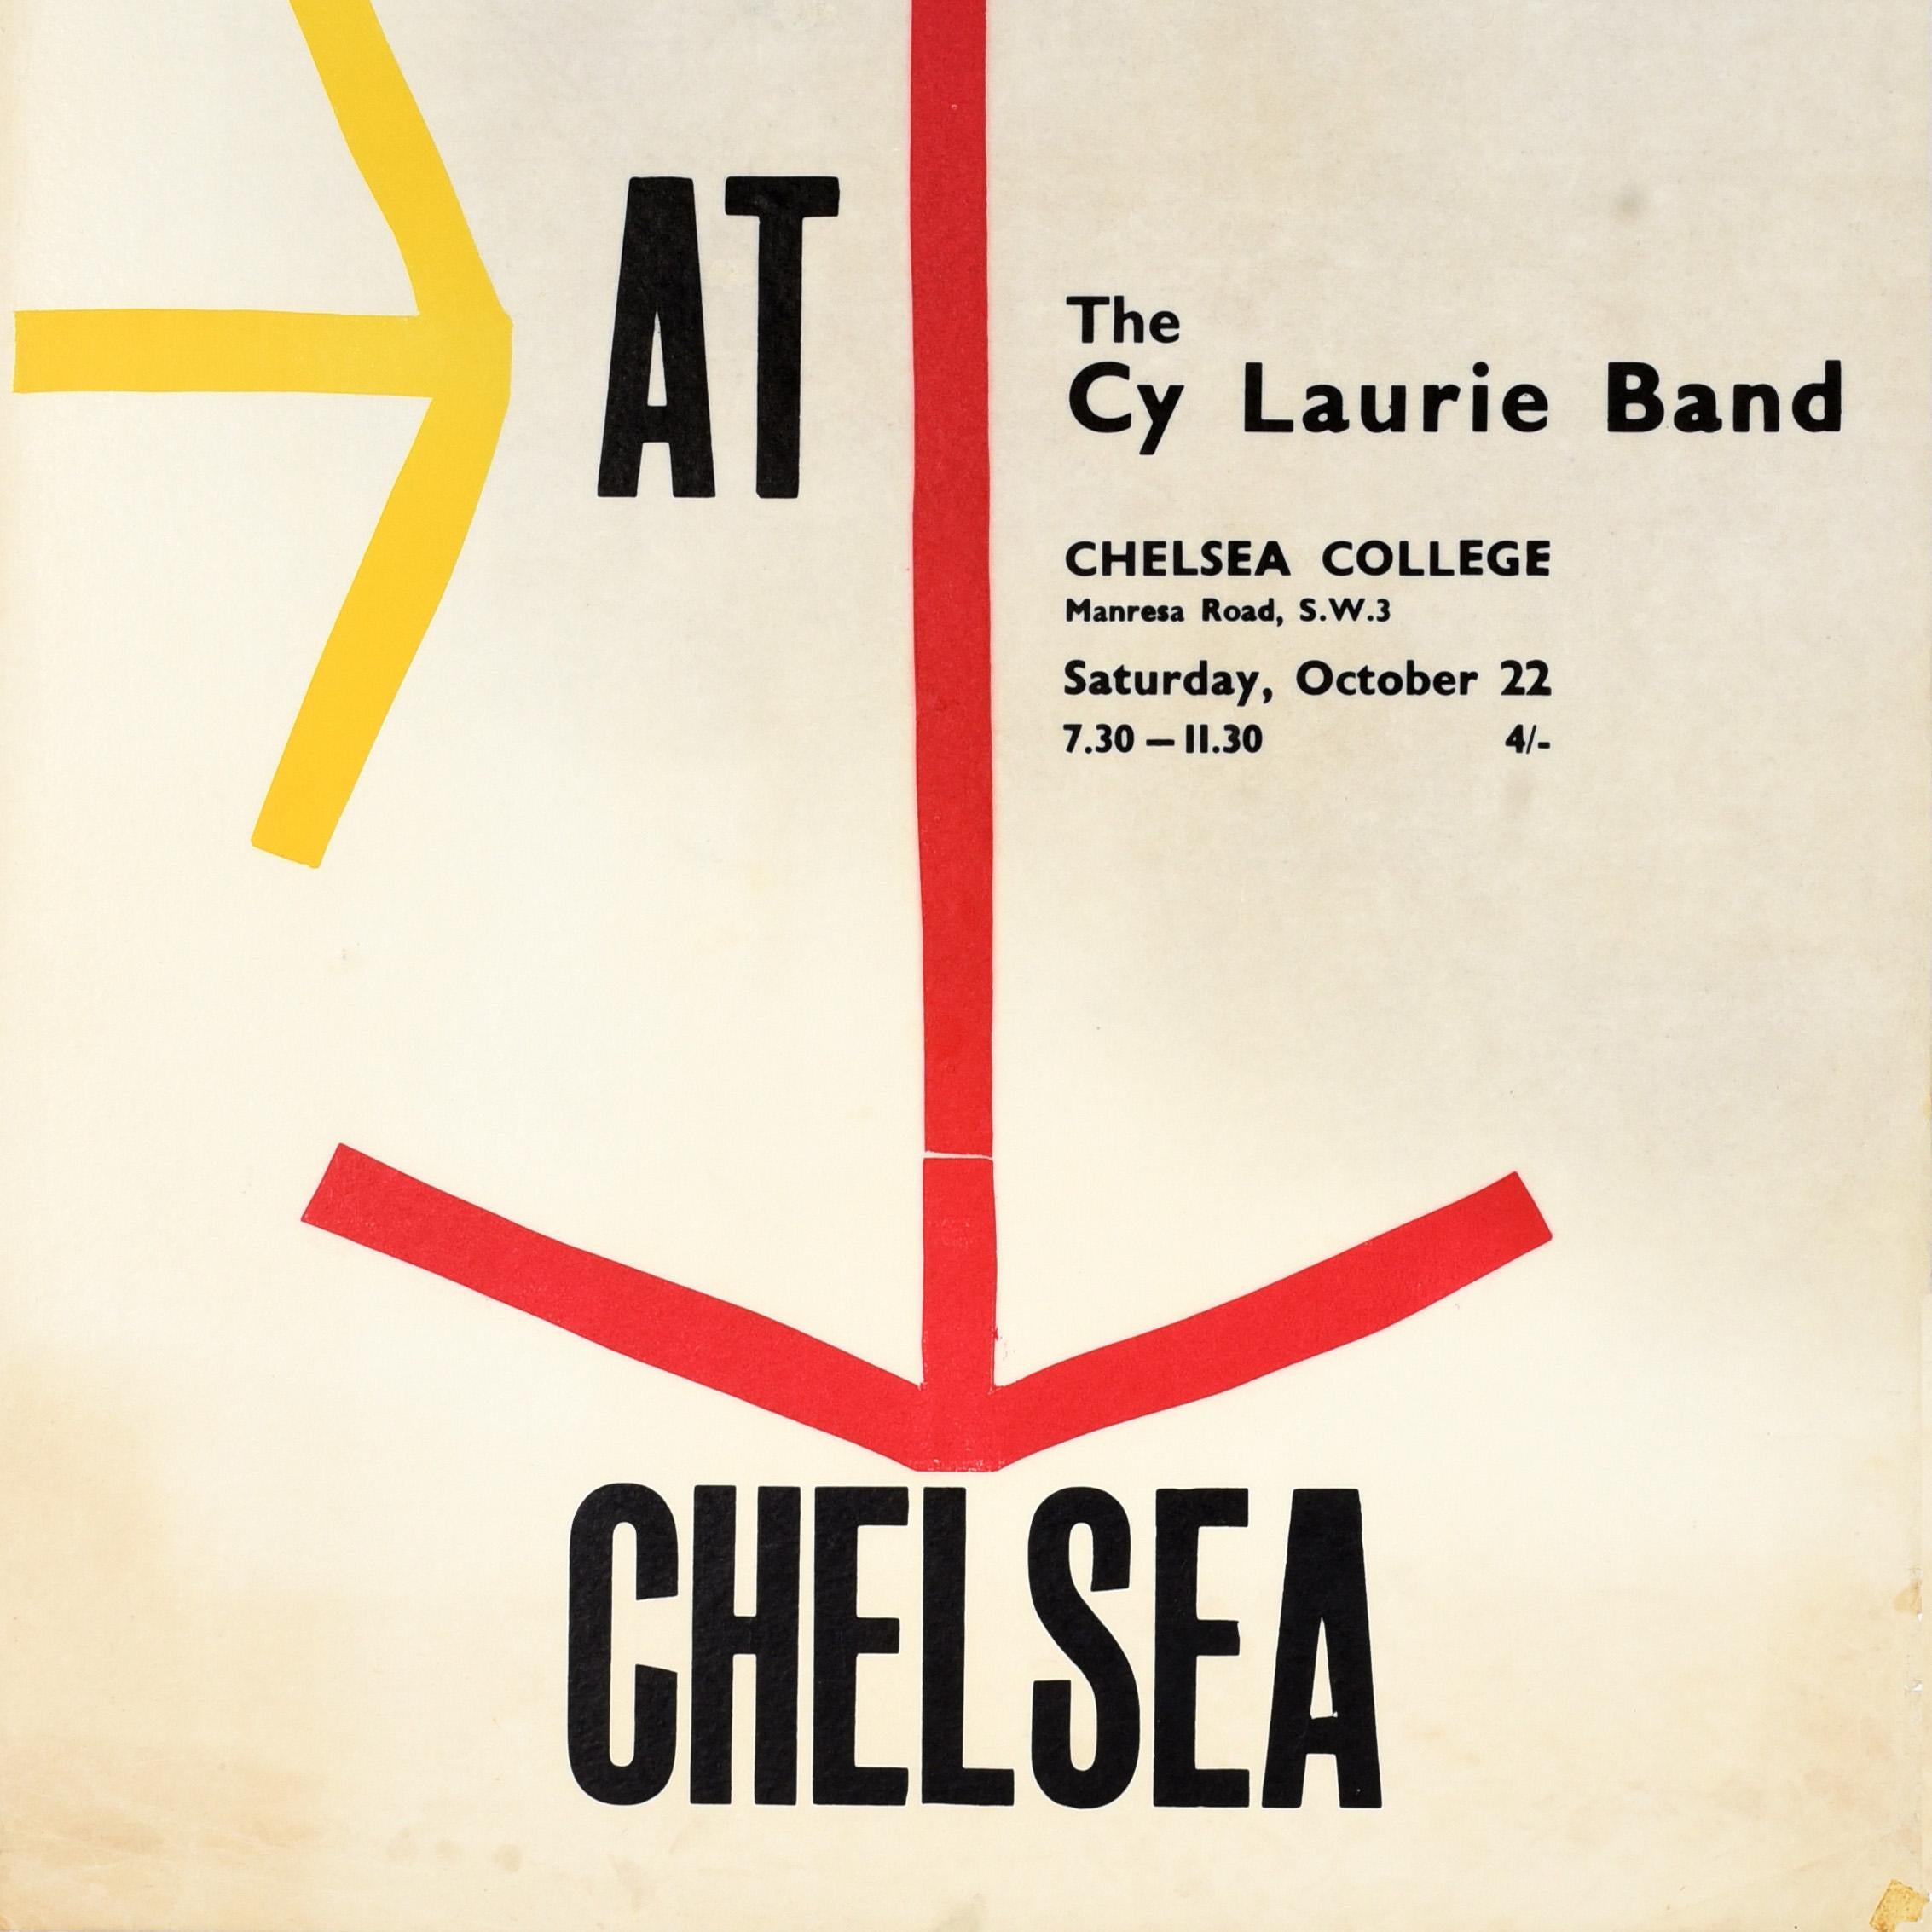 Original vintage music poster advertising Jazz At Chelsea The Cy Laurie Band performing at Chelsea College Manresa Road SW3 from 7:30-11:30 on Saturday 22 October tickets 4/- featuring a great graphic design of a red arrow pointing down and yellow